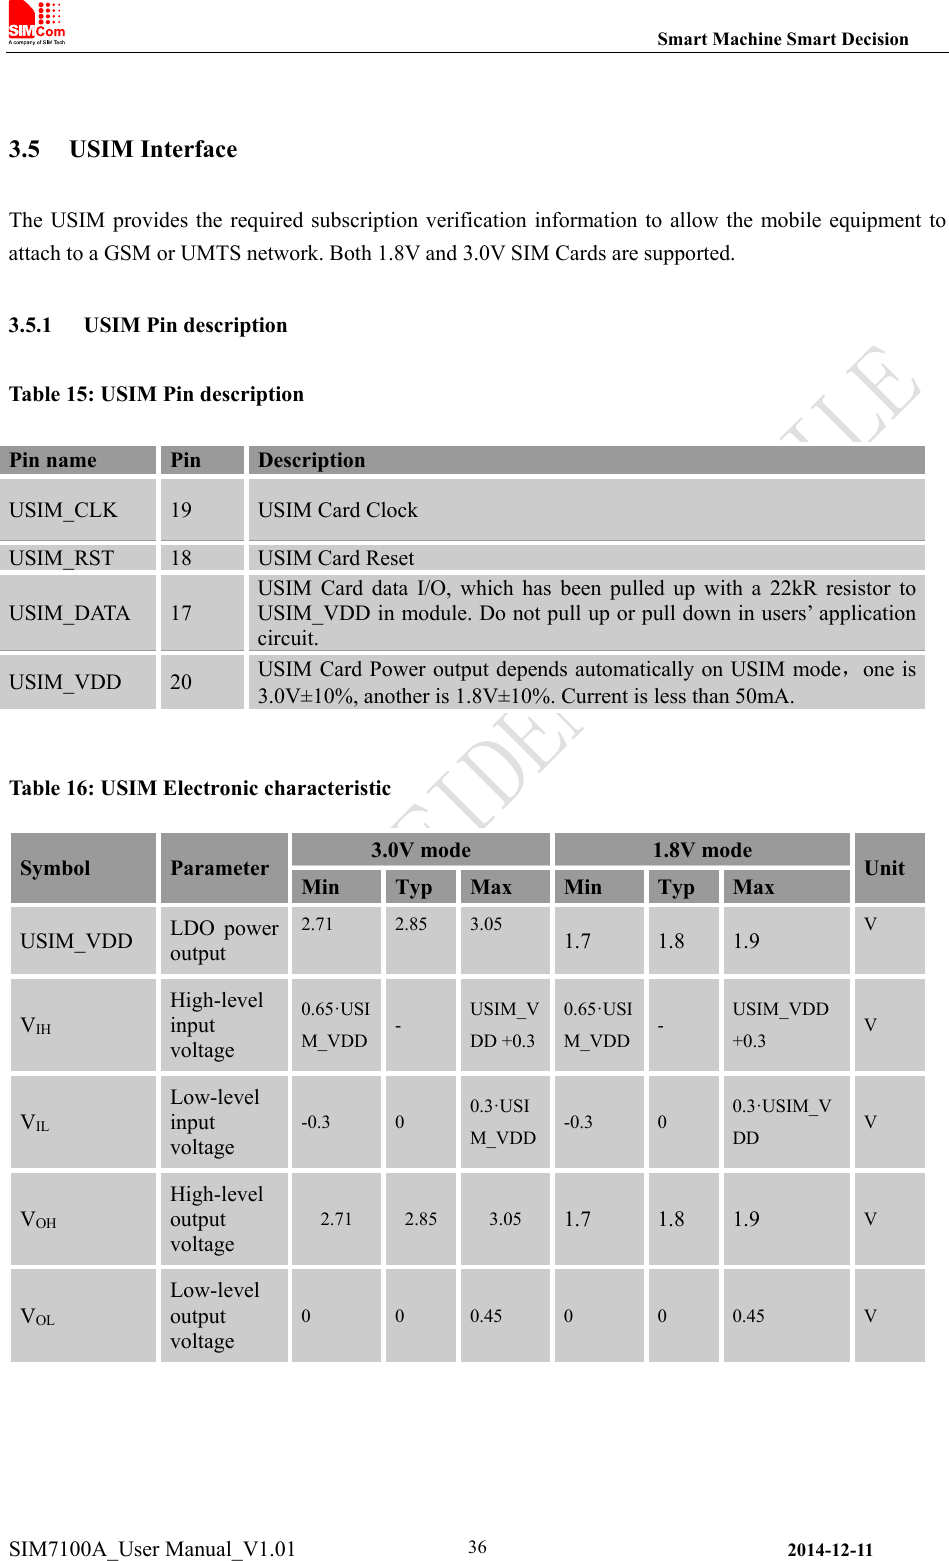                                                                Smart Machine Smart Decision SIM7100A_User Manual_V1.01                2014-12-11 36 3.5 USIM Interface The USIM provides the required  subscription verification information to allow the  mobile equipment to attach to a GSM or UMTS network. Both 1.8V and 3.0V SIM Cards are supported. 3.5.1 USIM Pin description Table 15: USIM Pin description  Table 16: USIM Electronic characteristic Symbol  Parameter  3.0V mode  1.8V mode  Unit Min  Typ  Max  Min  Typ  Max USIM_VDD  LDO  power output 2.71  2.85  3.05  1.7 1.8 1.9 V VIH High-level input voltage 0.65·USIM_VDD -  USIM_VDD +0.30.65·USIM_VDD -  USIM_VDD +0.3  V VIL Low-level input voltage -0.3  0  0.3·USIM_VDD -0.3  0  0.3·USIM_VDD  V VOH High-level output voltage 2.71  2.85  3.05  1.7 1.8 1.9 V VOL Low-level output voltage 0  0  0.45  0  0  0.45  V  Pin name  Pin  Description USIM_CLK  19  USIM Card Clock USIM_RST  18  USIM Card Reset USIM_DATA  17 USIM  Card  data  I/O,  which  has  been  pulled  up  with  a  22kR  resistor  to USIM_VDD in module. Do not pull up or pull down in users’ application circuit. USIM_VDD  20  USIM Card Power output depends automatically on USIM mode，one is 3.0V±10%, another is 1.8V±10%. Current is less than 50mA. 